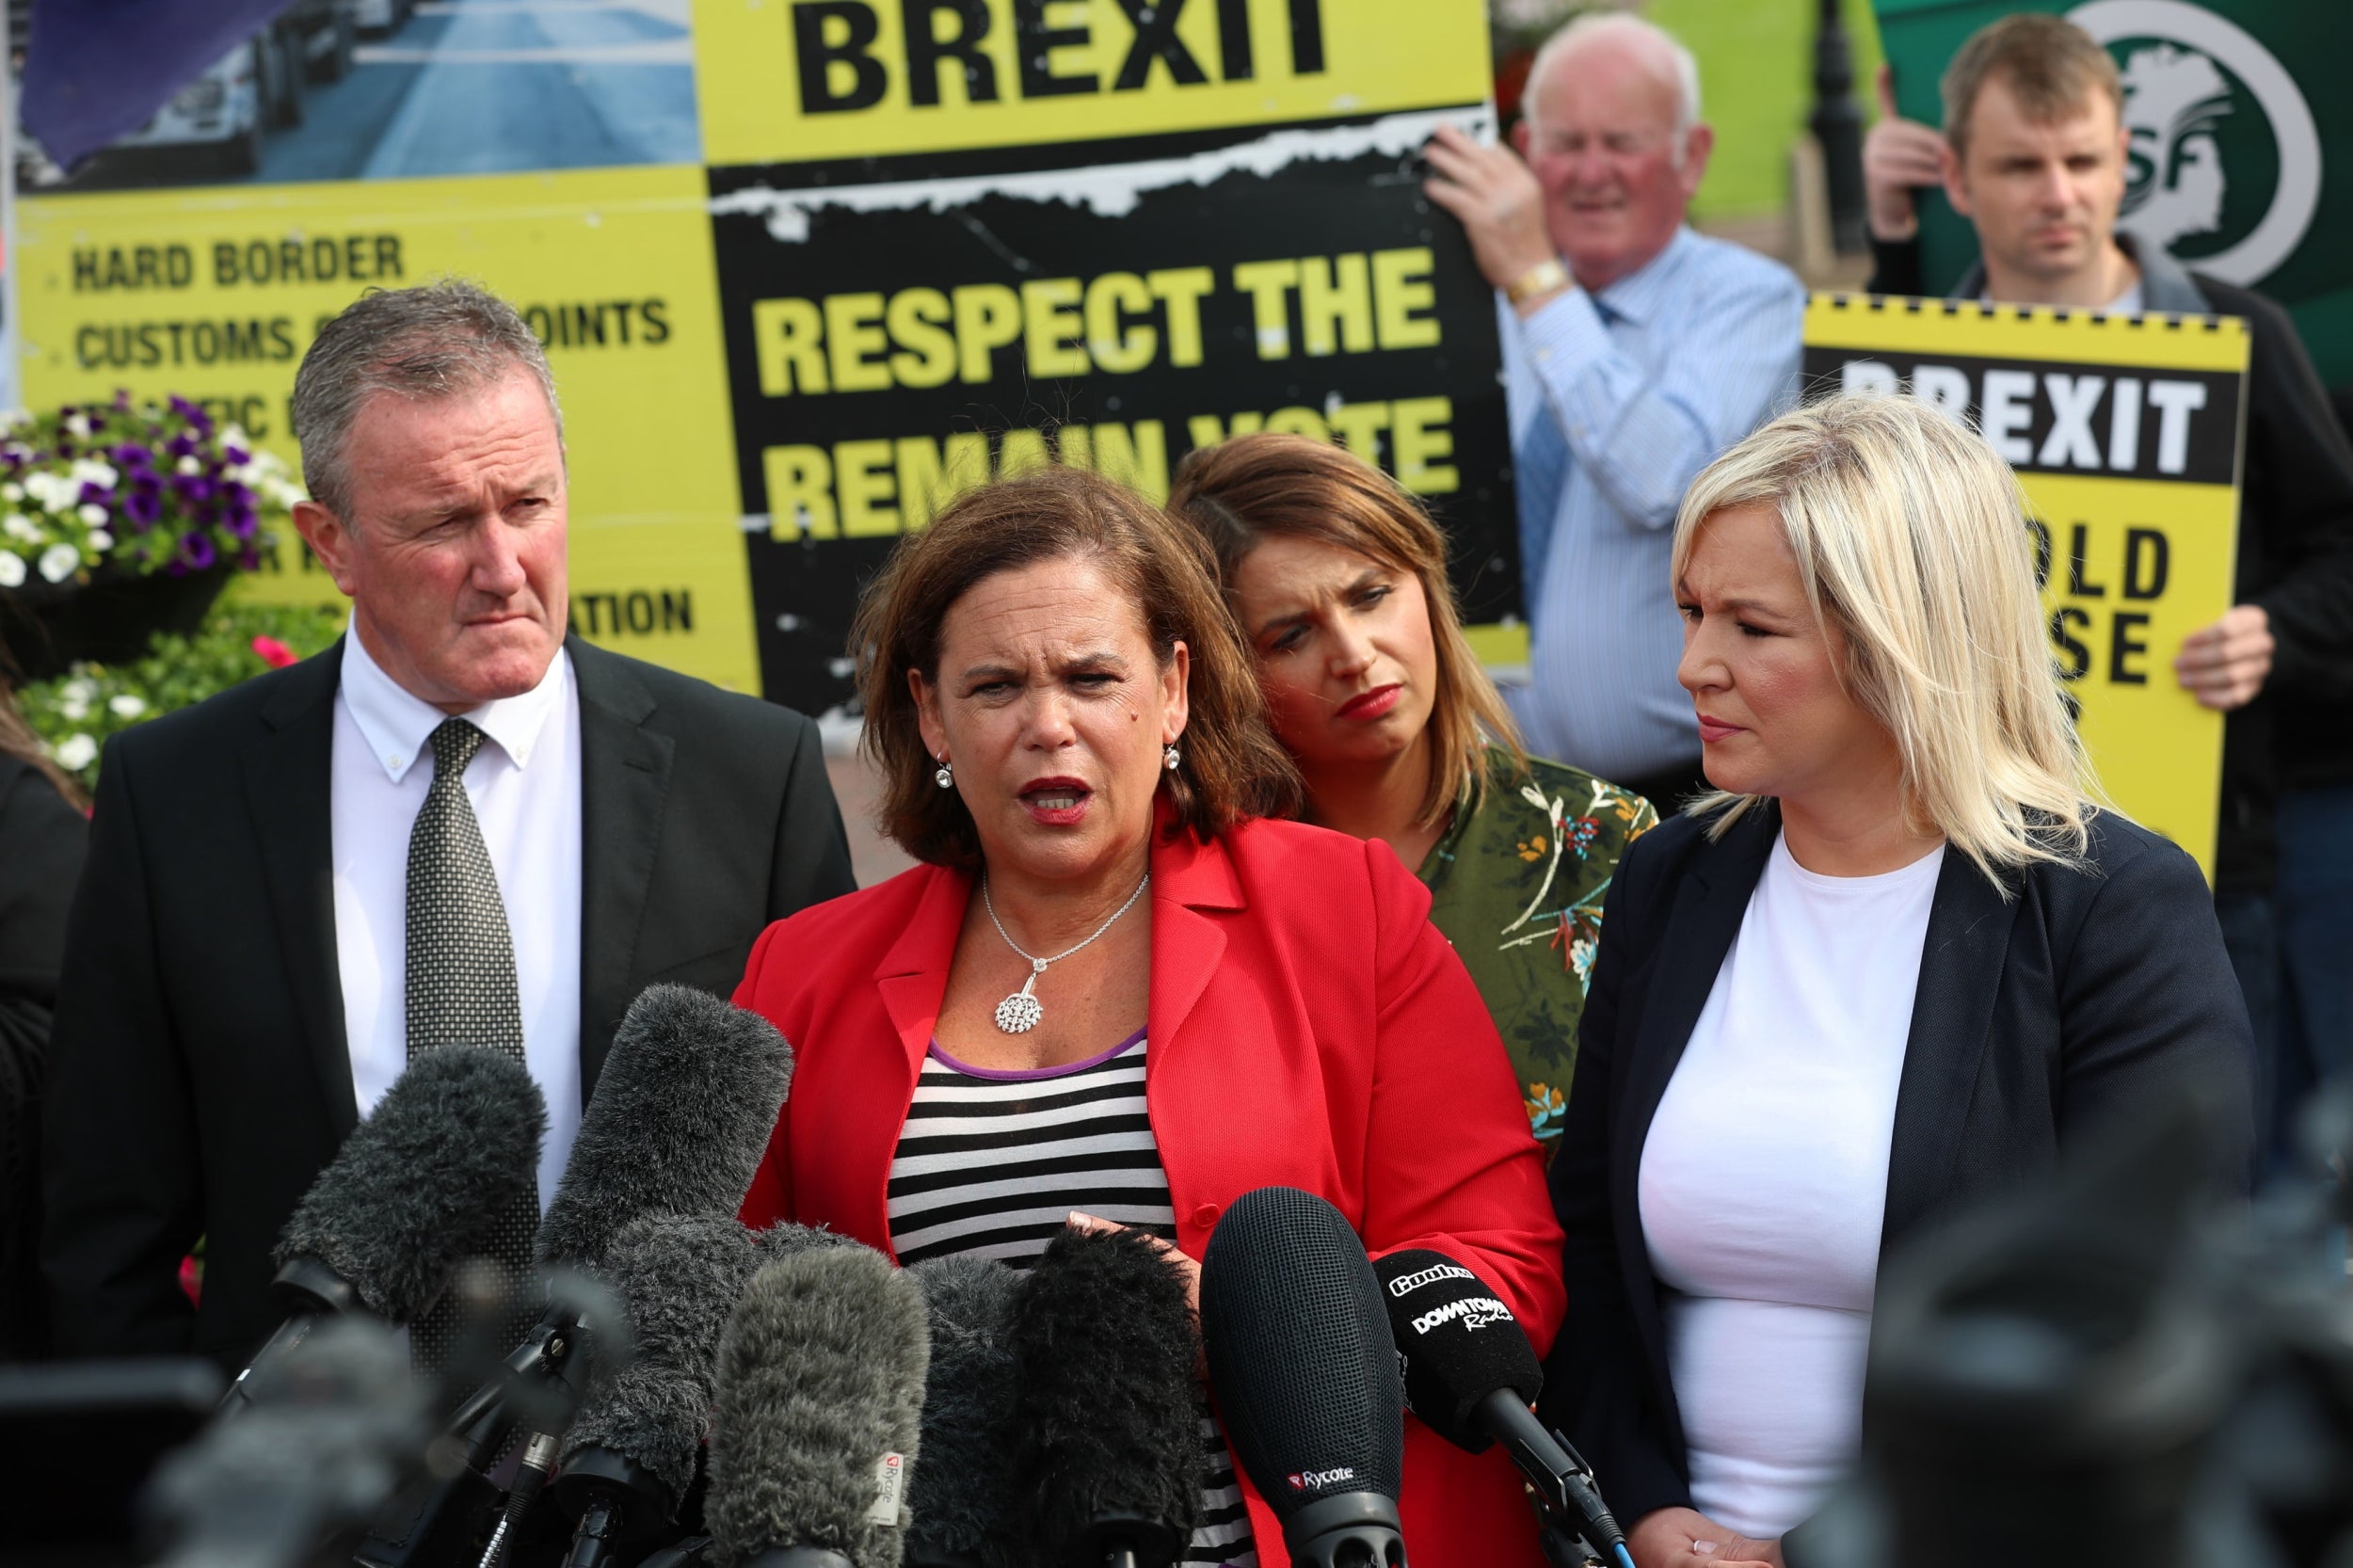 Sinn Fein's Mary Lou McDonald spoke after her meeting with Mr Johnson